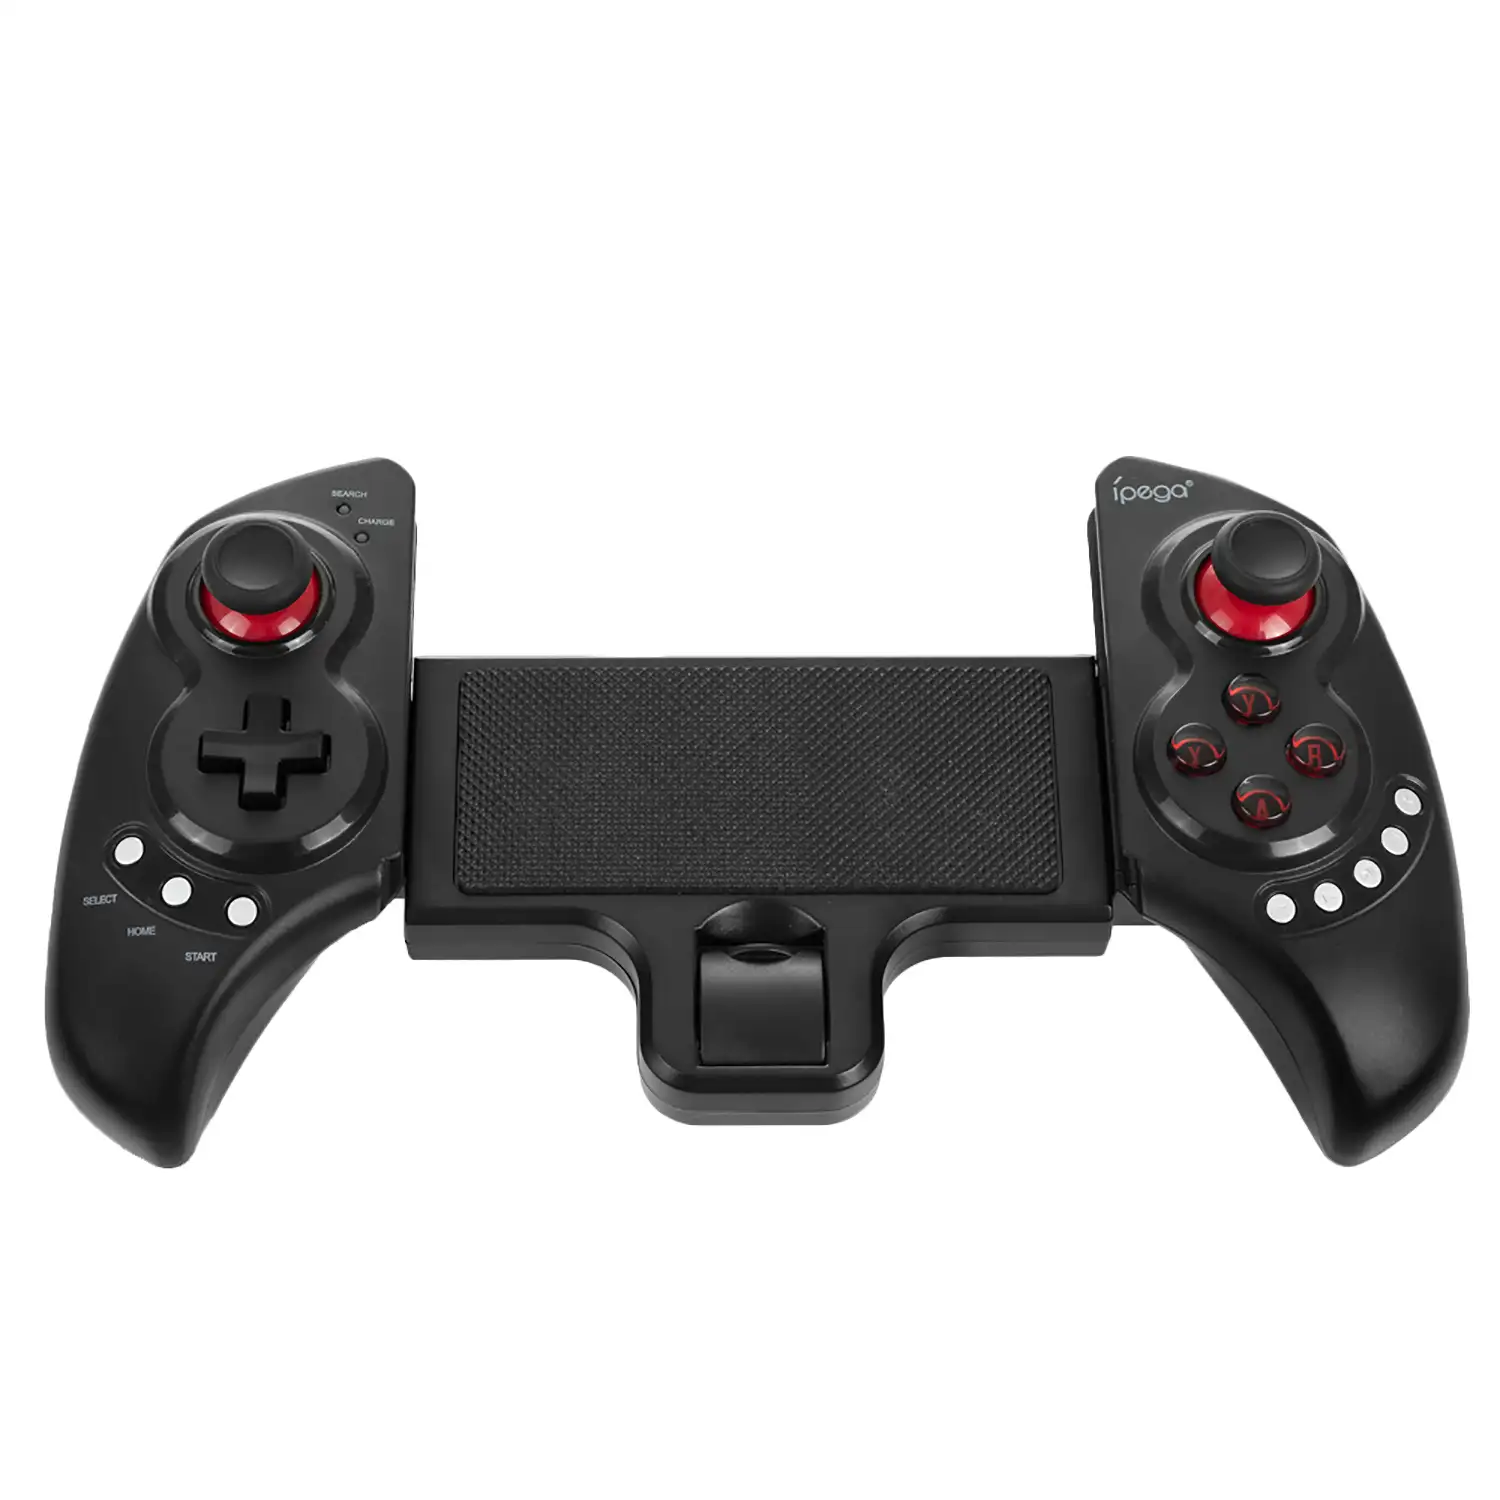 Gamepad Bluetooth extensible, con stand central, para Smartphones